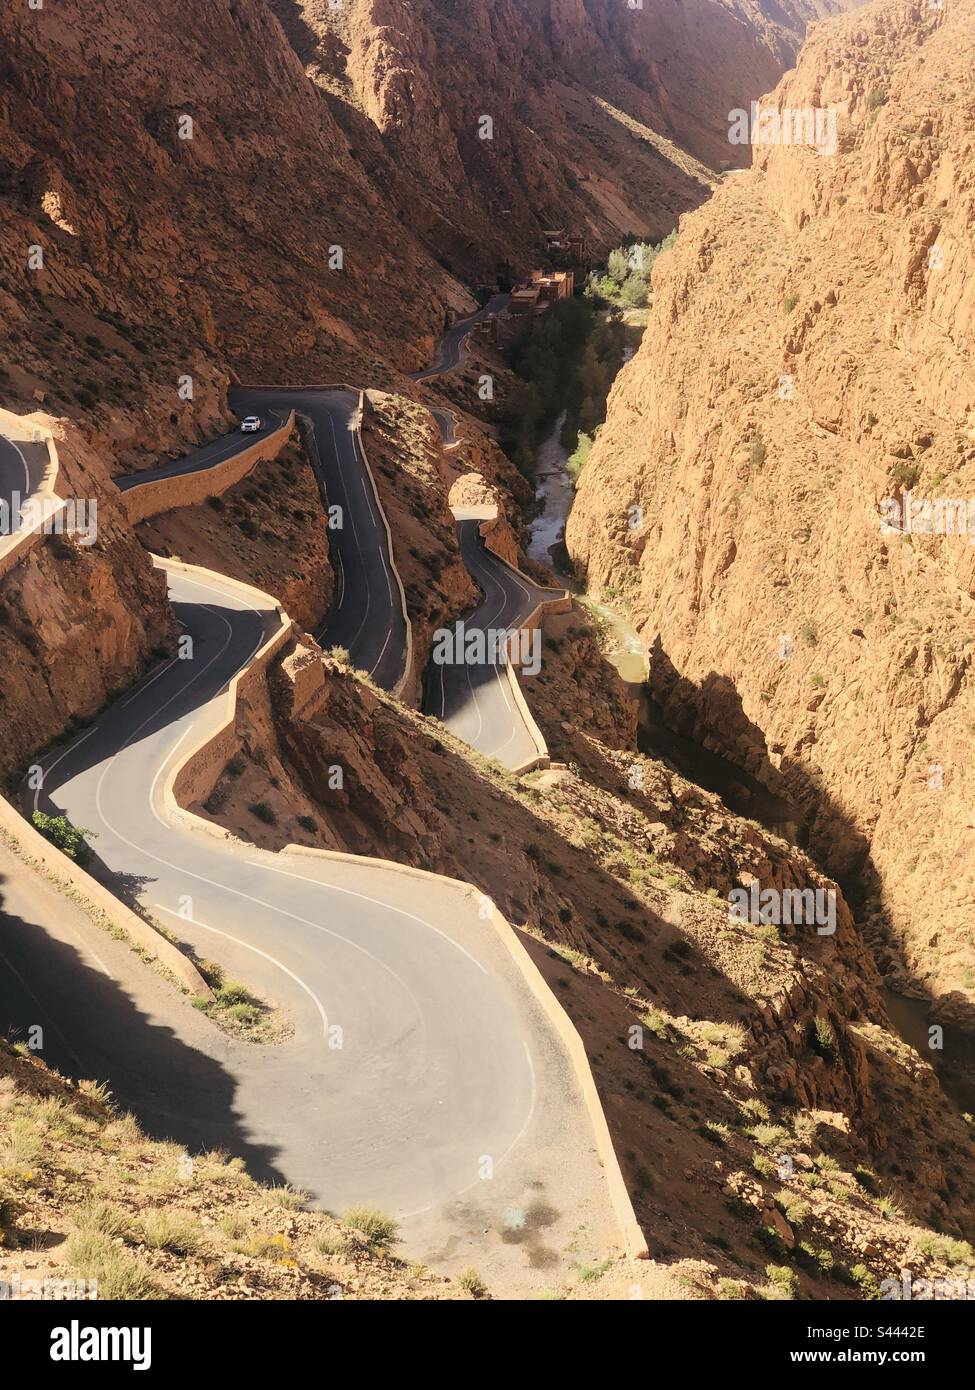 Serpentine road DADESVALLEY Morocco Stock Photo